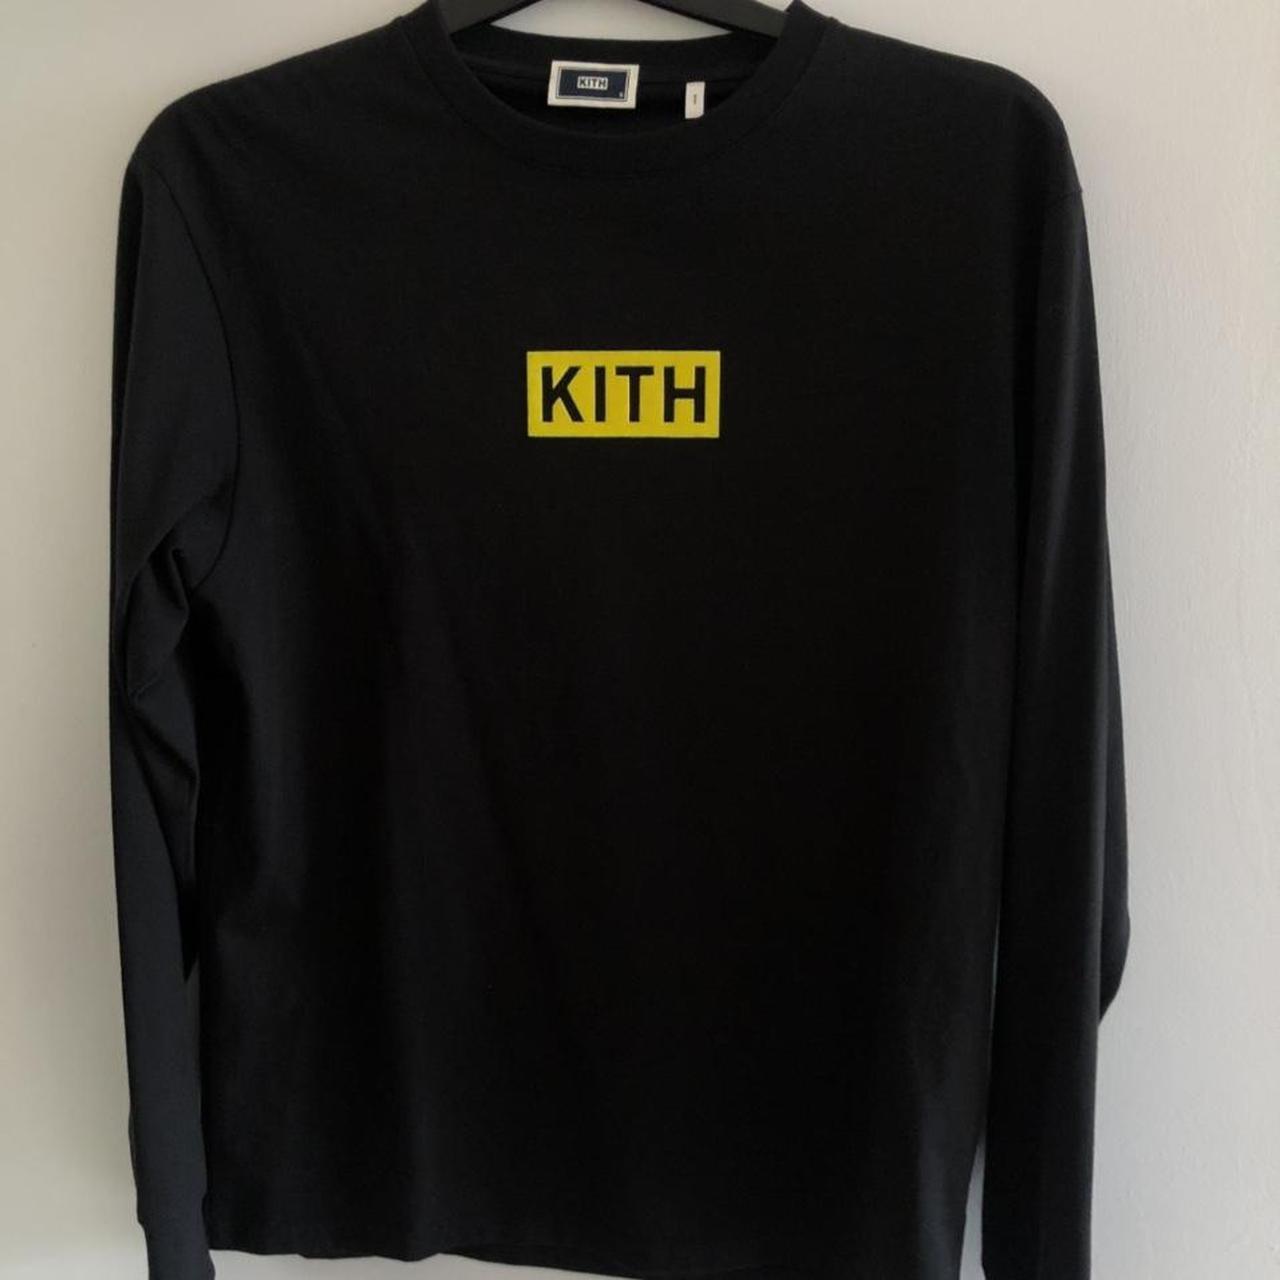 Kith long sleeved top with yellow box logo - Perfect... - Depop